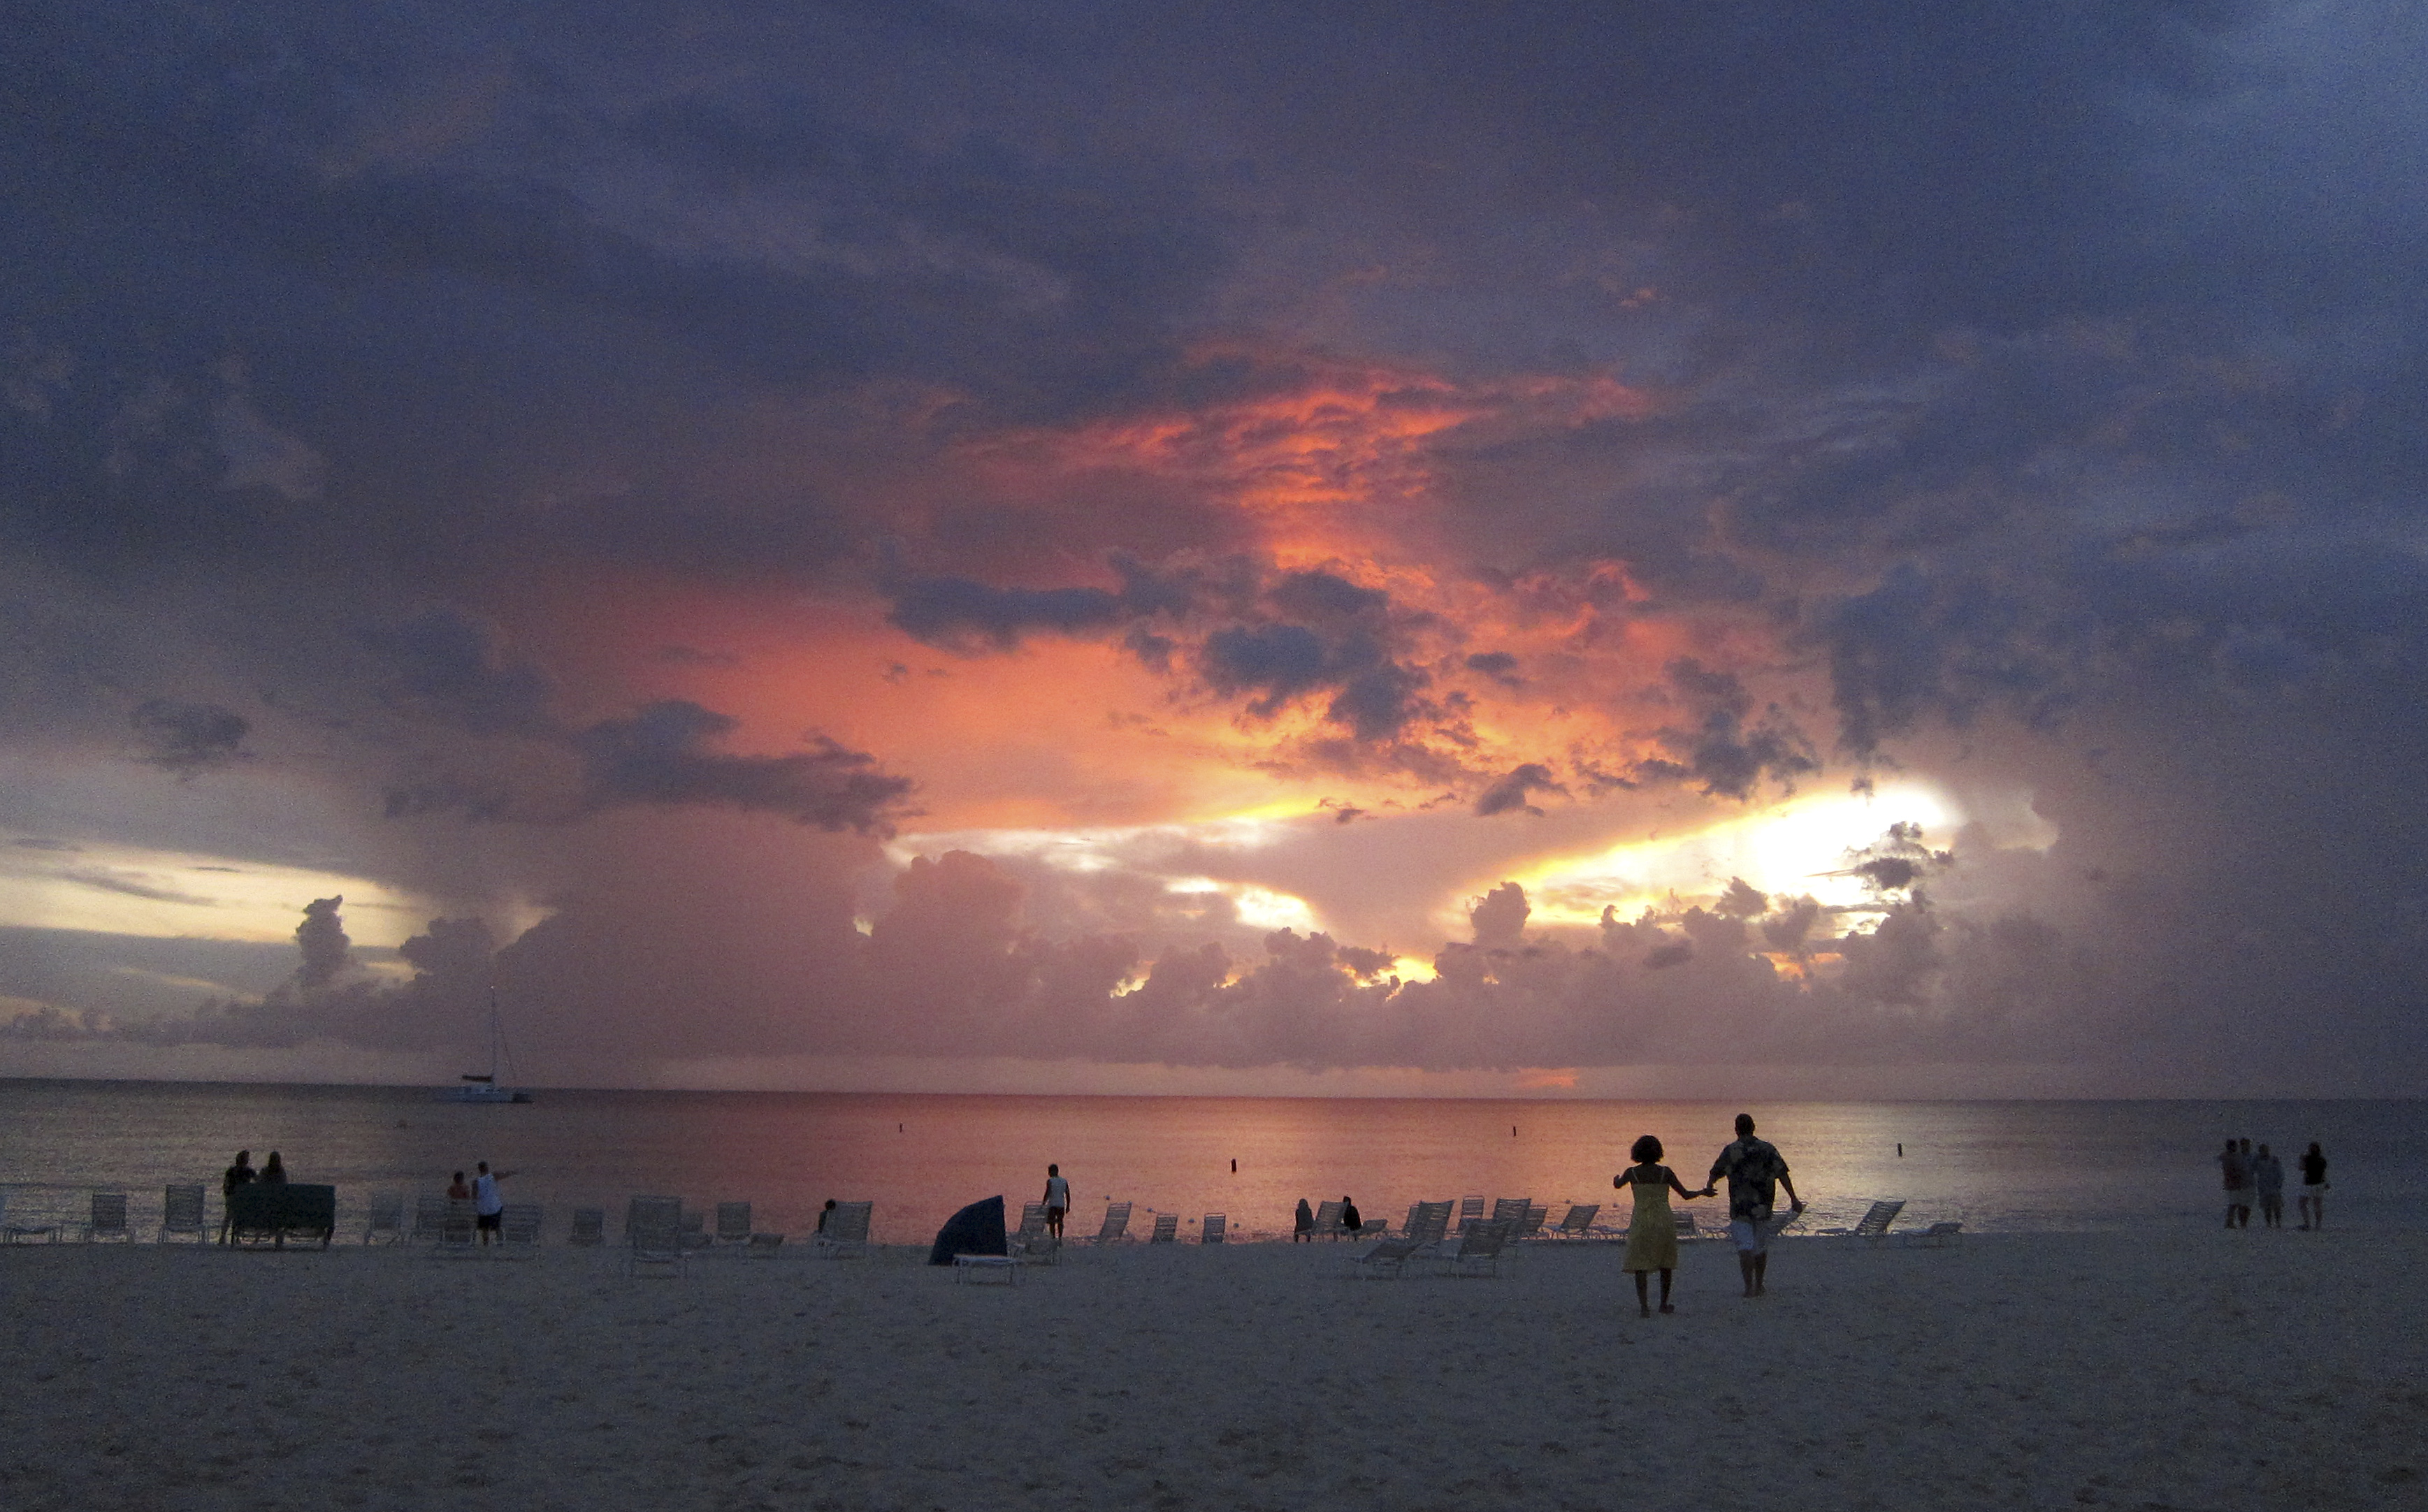 Tourists walk on Seven Mile Beach at sunset in George Town, Cayman Islands July 28, 2011. REUTERS/Gary Hershorn